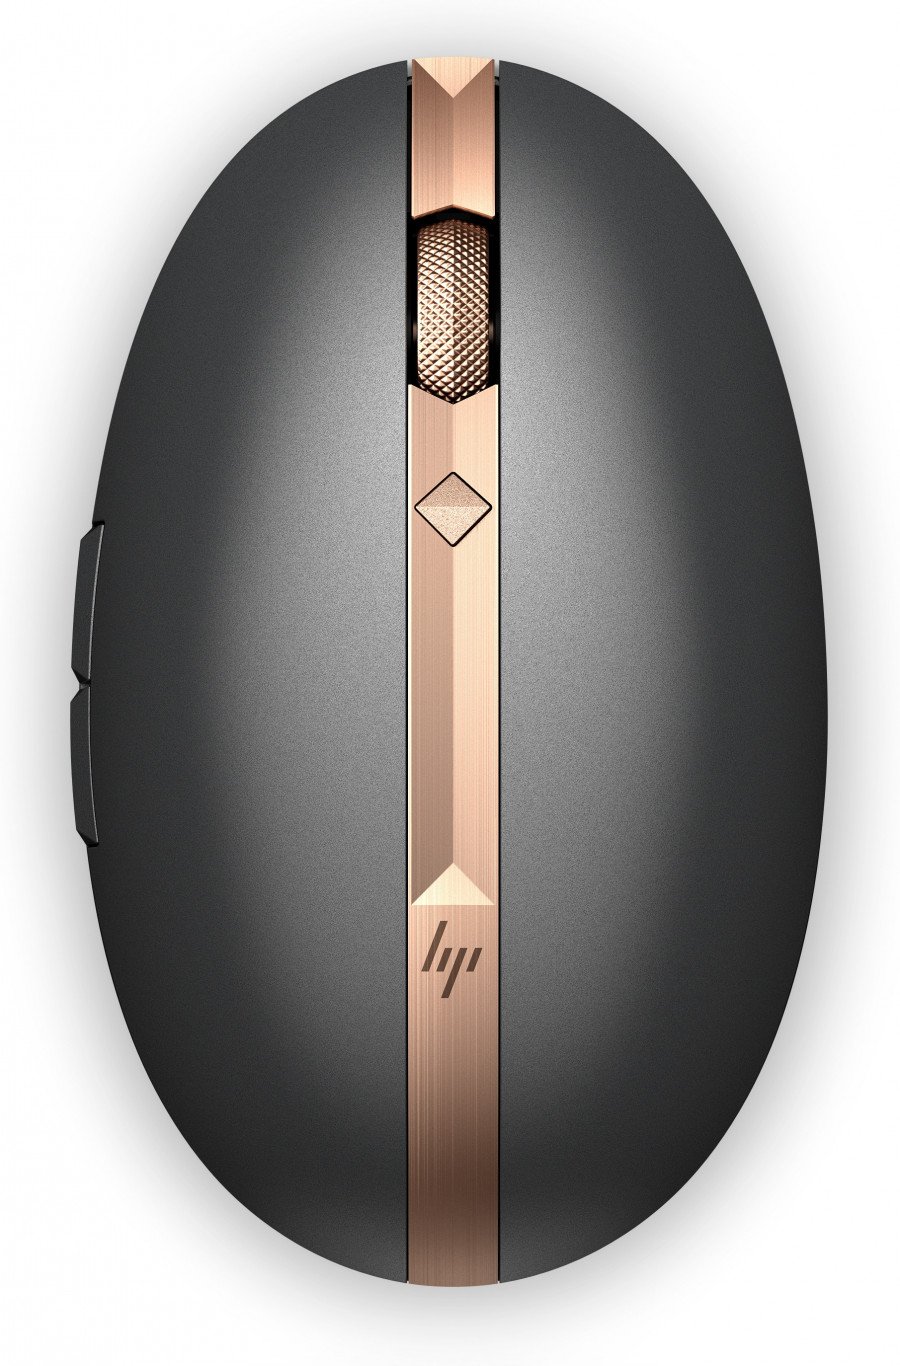 Image of Hp hewlett packard spectre mouse 700 3nz70aa spectre 700 luxe coop. Spectre Mouse 700 Componenti Informatica